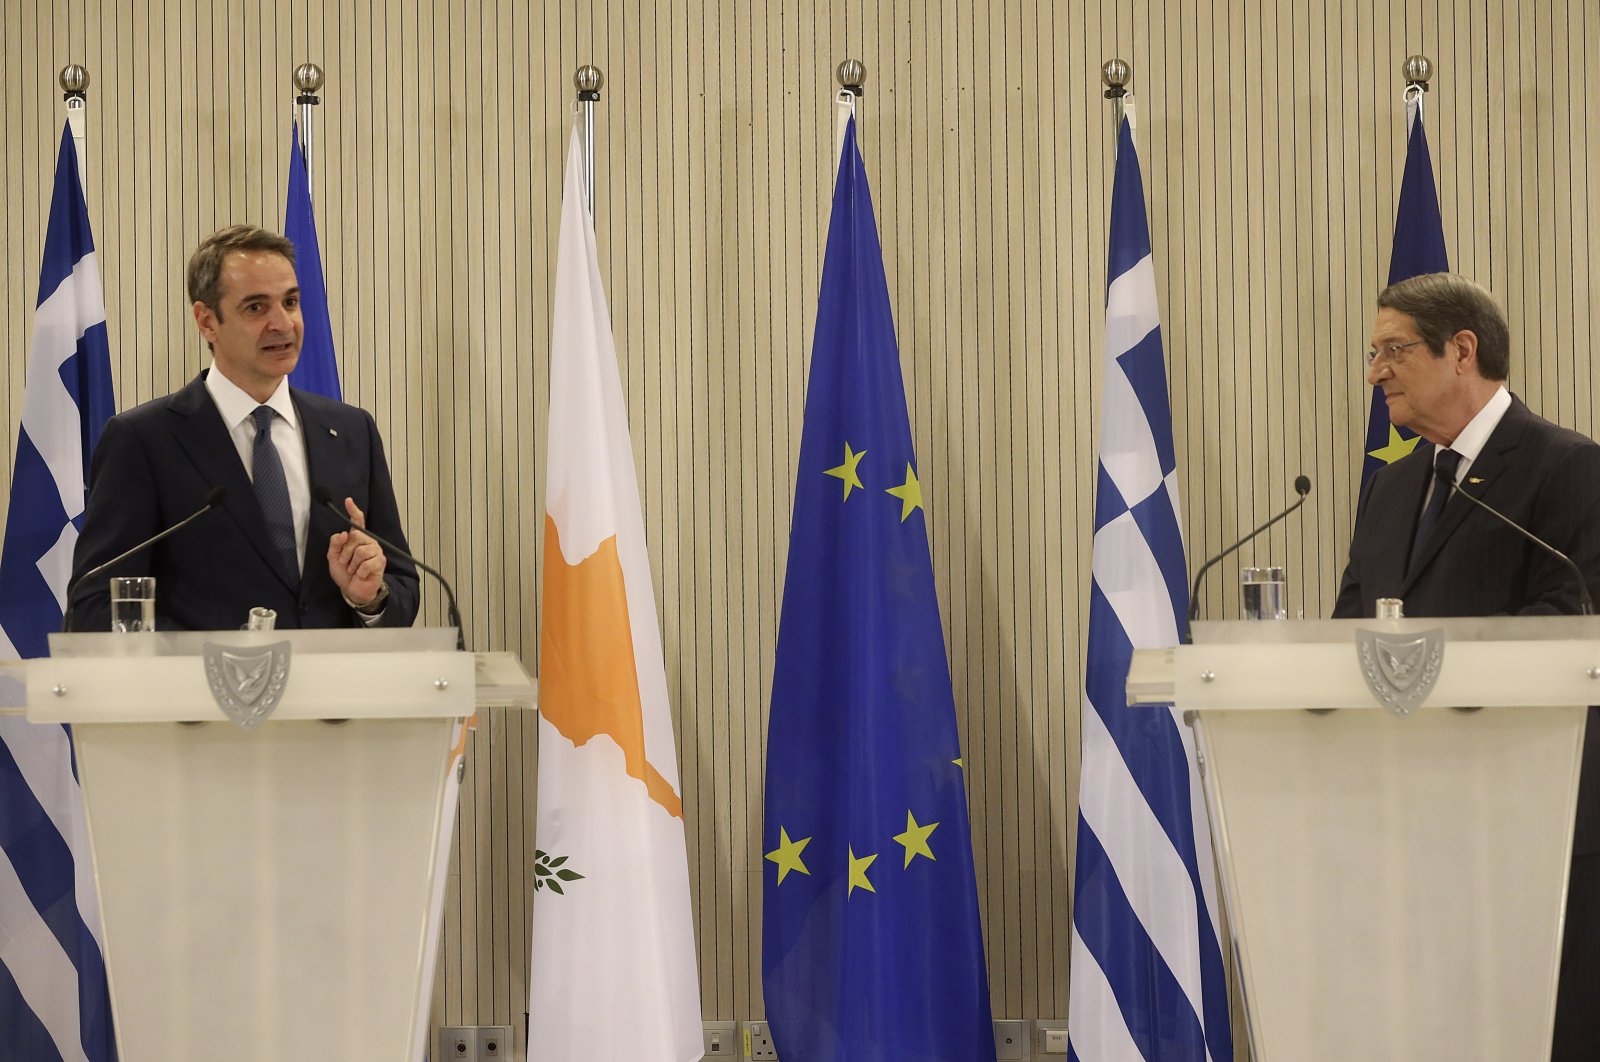 Greek Prime Minister Kyriakos Mitsotakis (L) and Greek Cypriot leader Nicos Anastasiades talk during a press conference after their meeting at the presidential palace in Nicosia on the island of Cyprus, Feb. 8, 2021. (AP Photo)